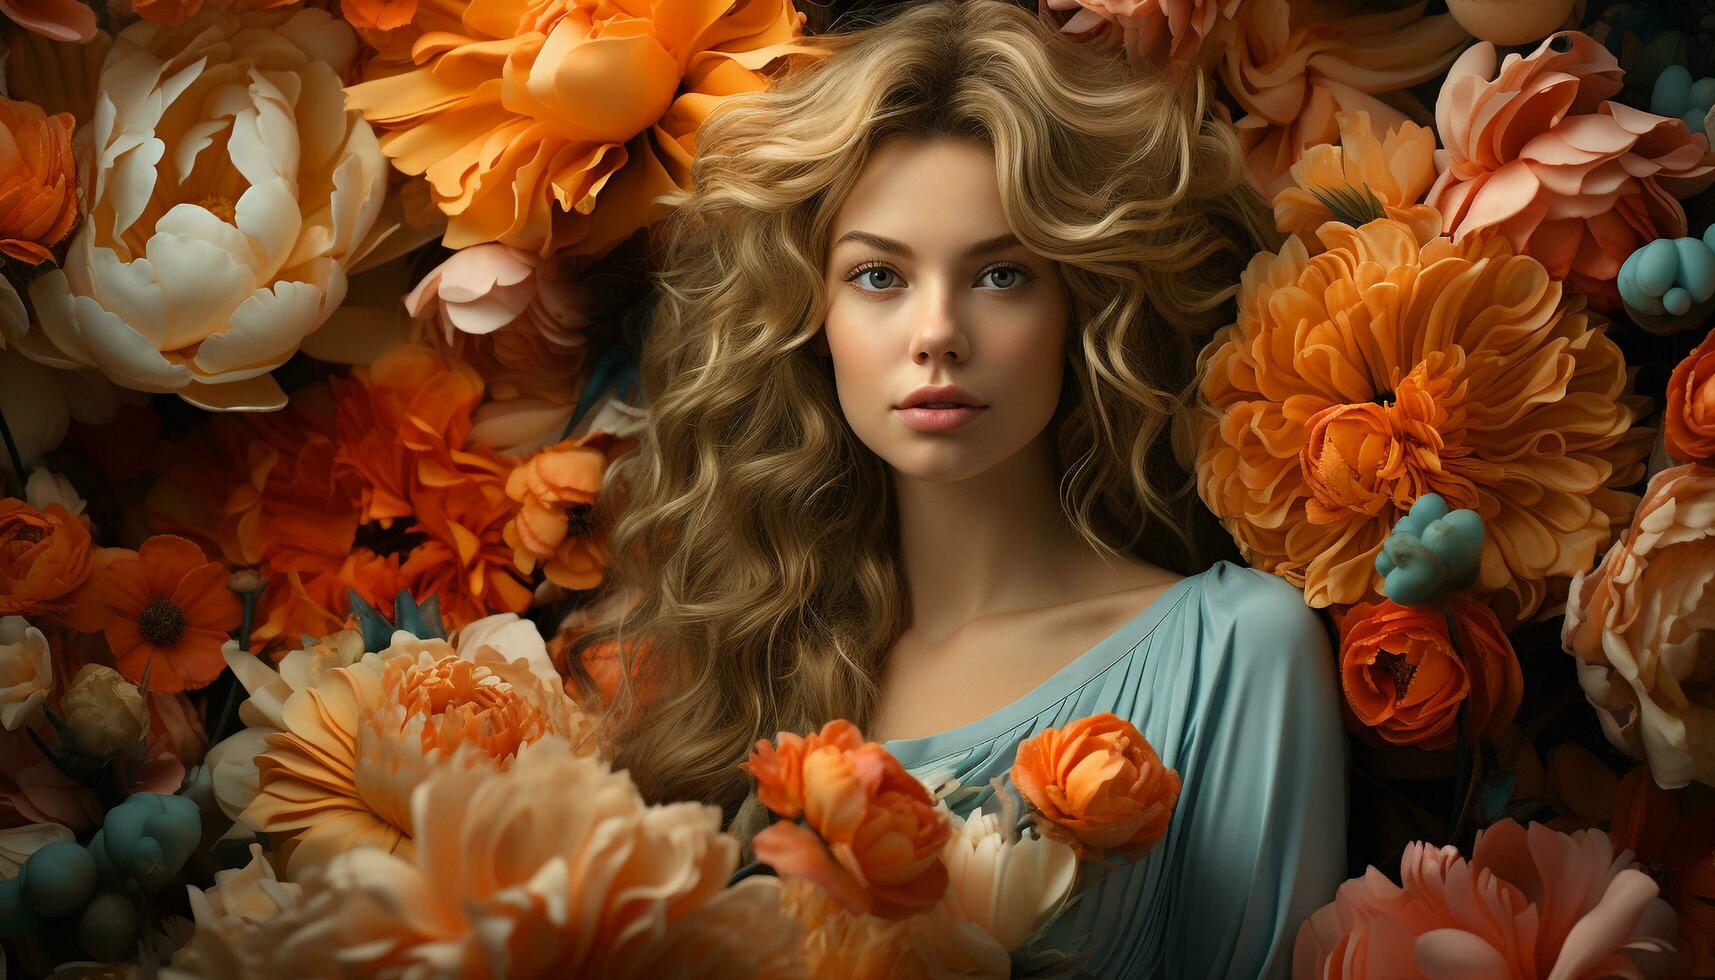 A beautiful blond woman, smiling, surrounded by colorful flowers generated by AI photo